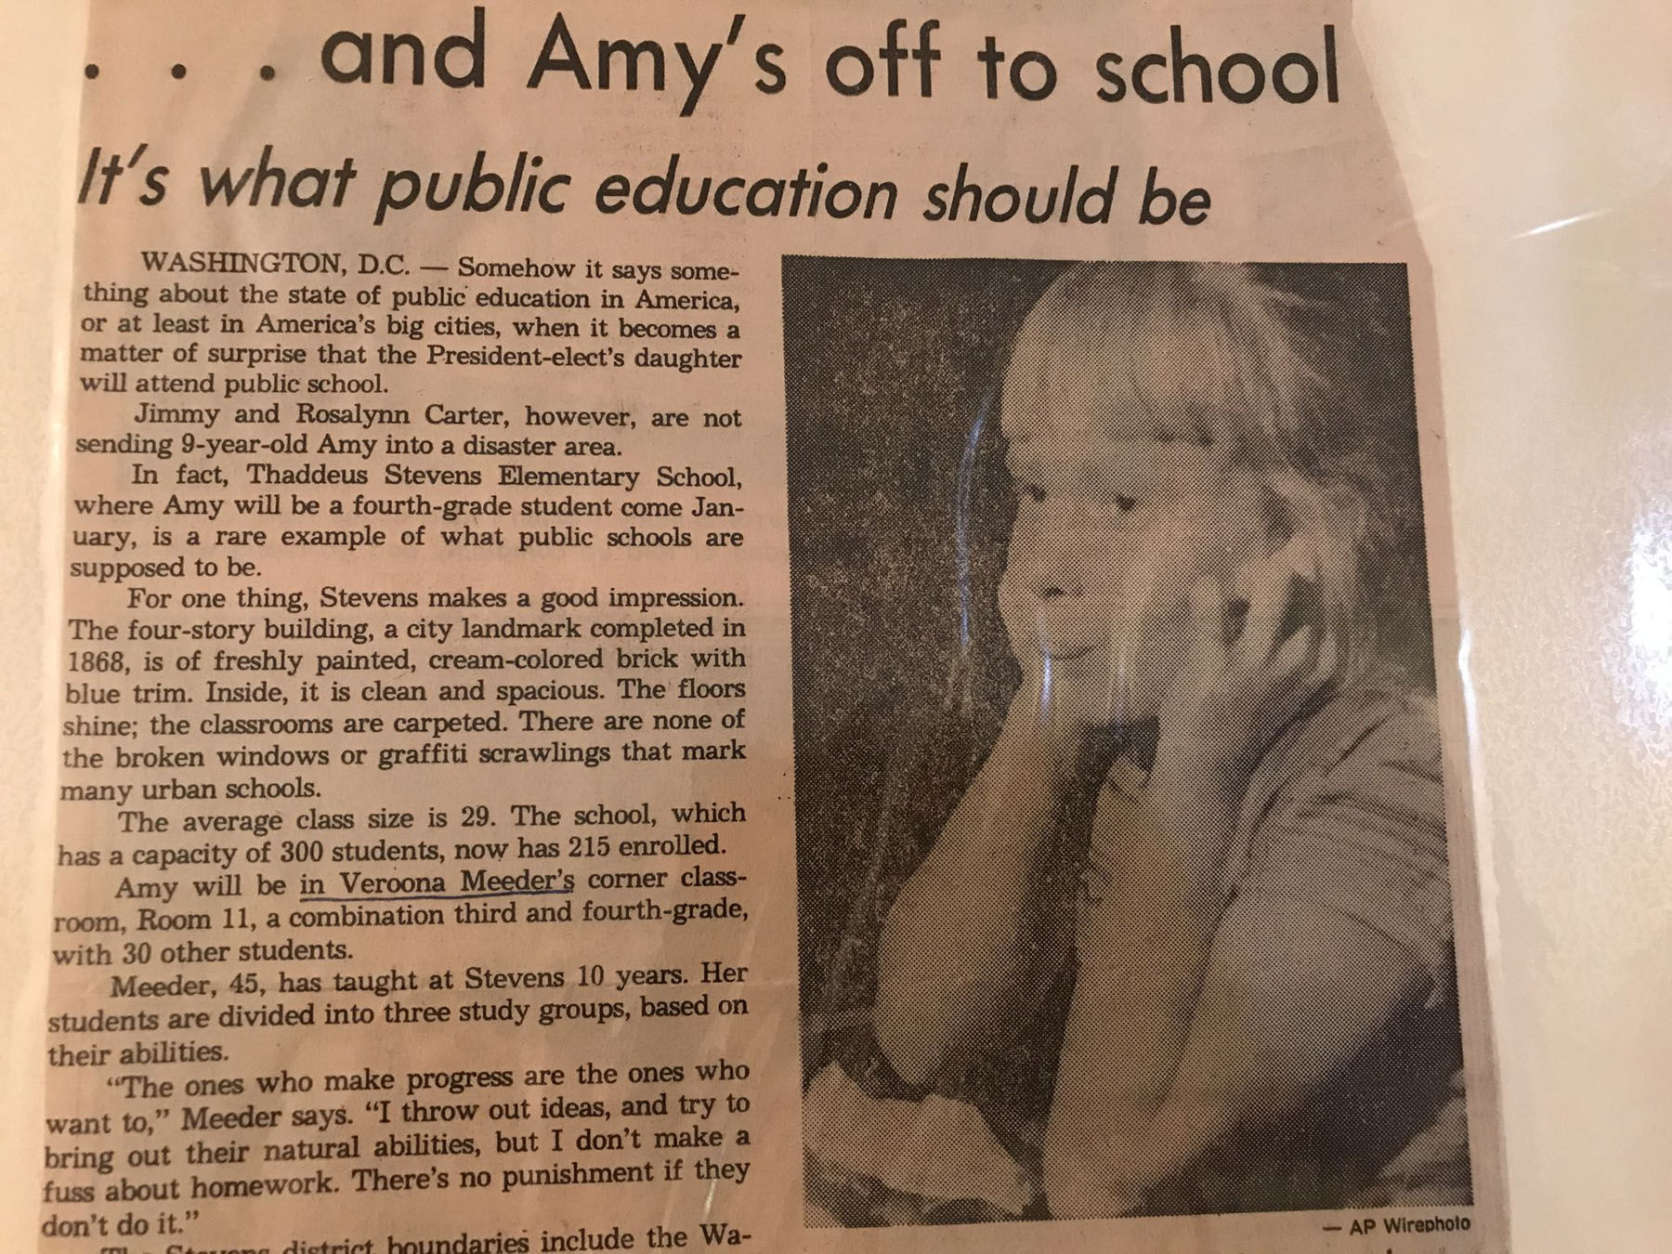 The decision to send the president's daughter to public school was the subject of intense public scrutiny. "Somehow it says something about the state of public education in America, or least in America's big cities, when it becomes a matter of surprise that the President-elect's daughter will attend public school," states this newspaper article from Verona Meeder's scrapbook. Meeder is misidentified in the sixth paragraph as Veroona. (Courtesy Verona Meeder)